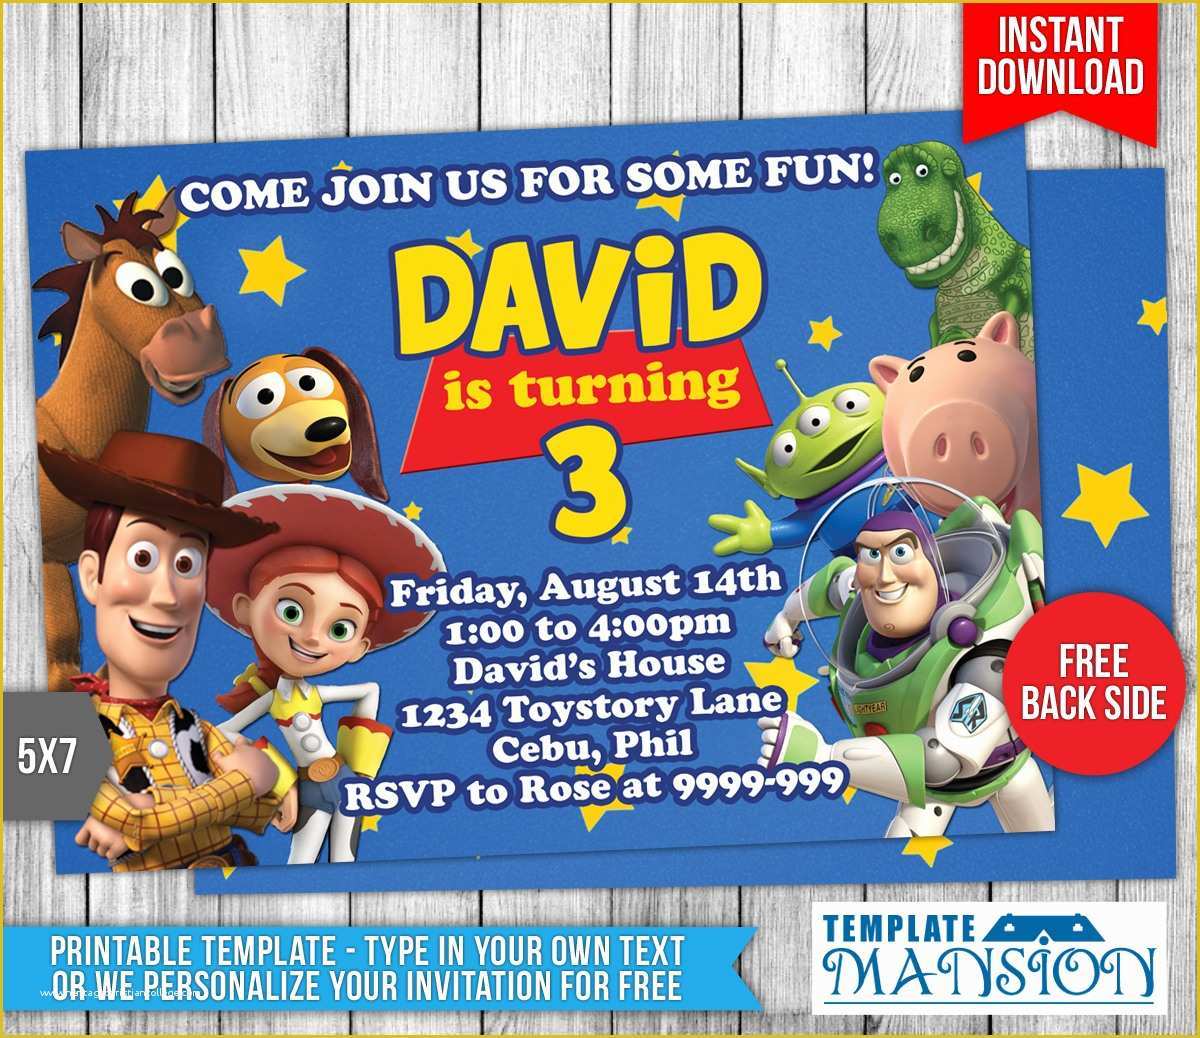 Toy Story Birthday Invitations Template Free Of toy Story Birthday Invitation 1 by Templatemansion On